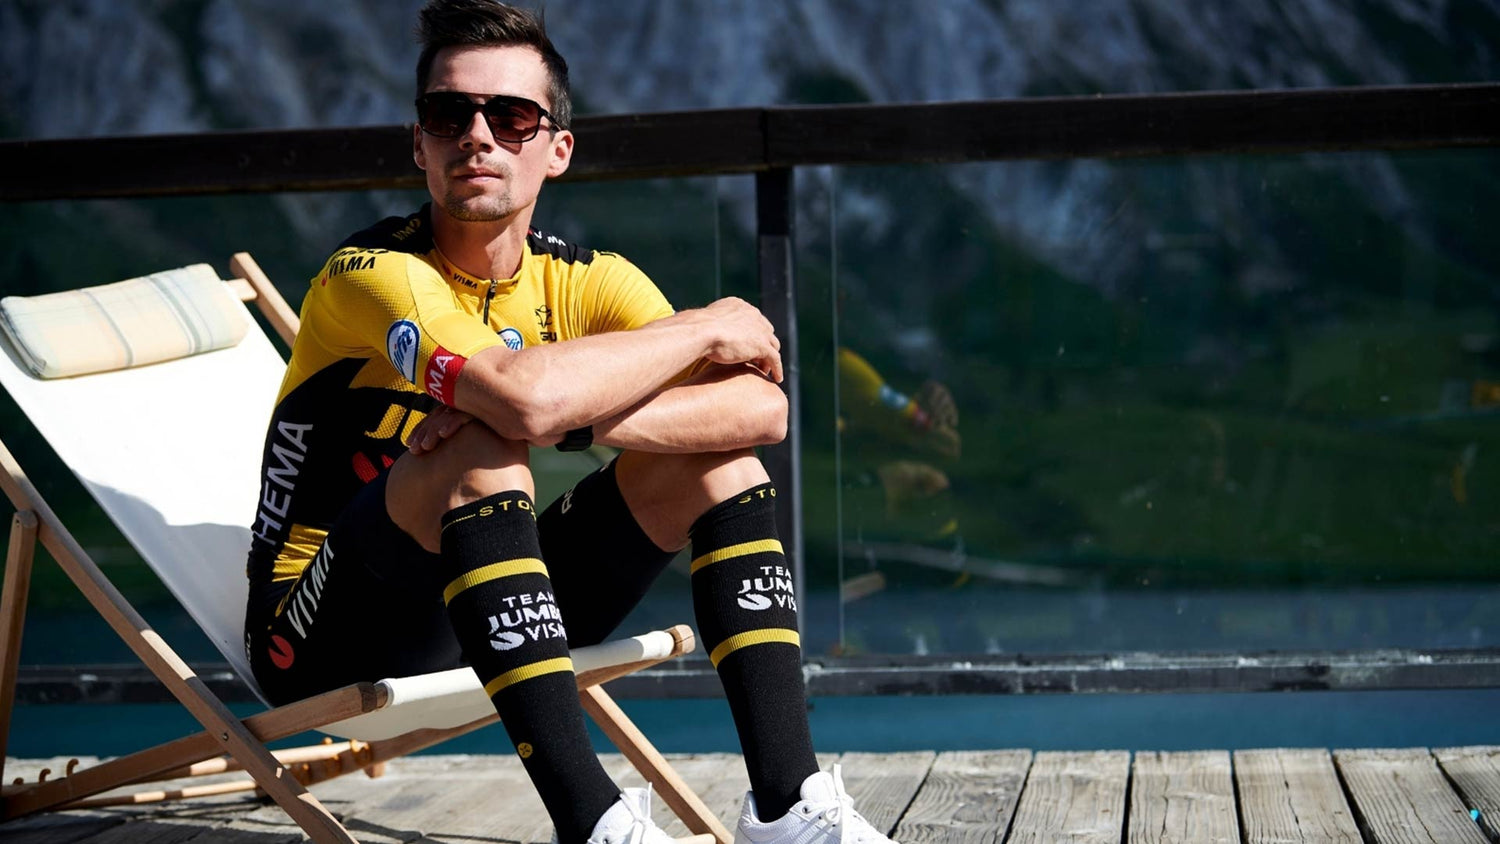 Primoz Roglic wearing sunglasses while sitting on a chair.